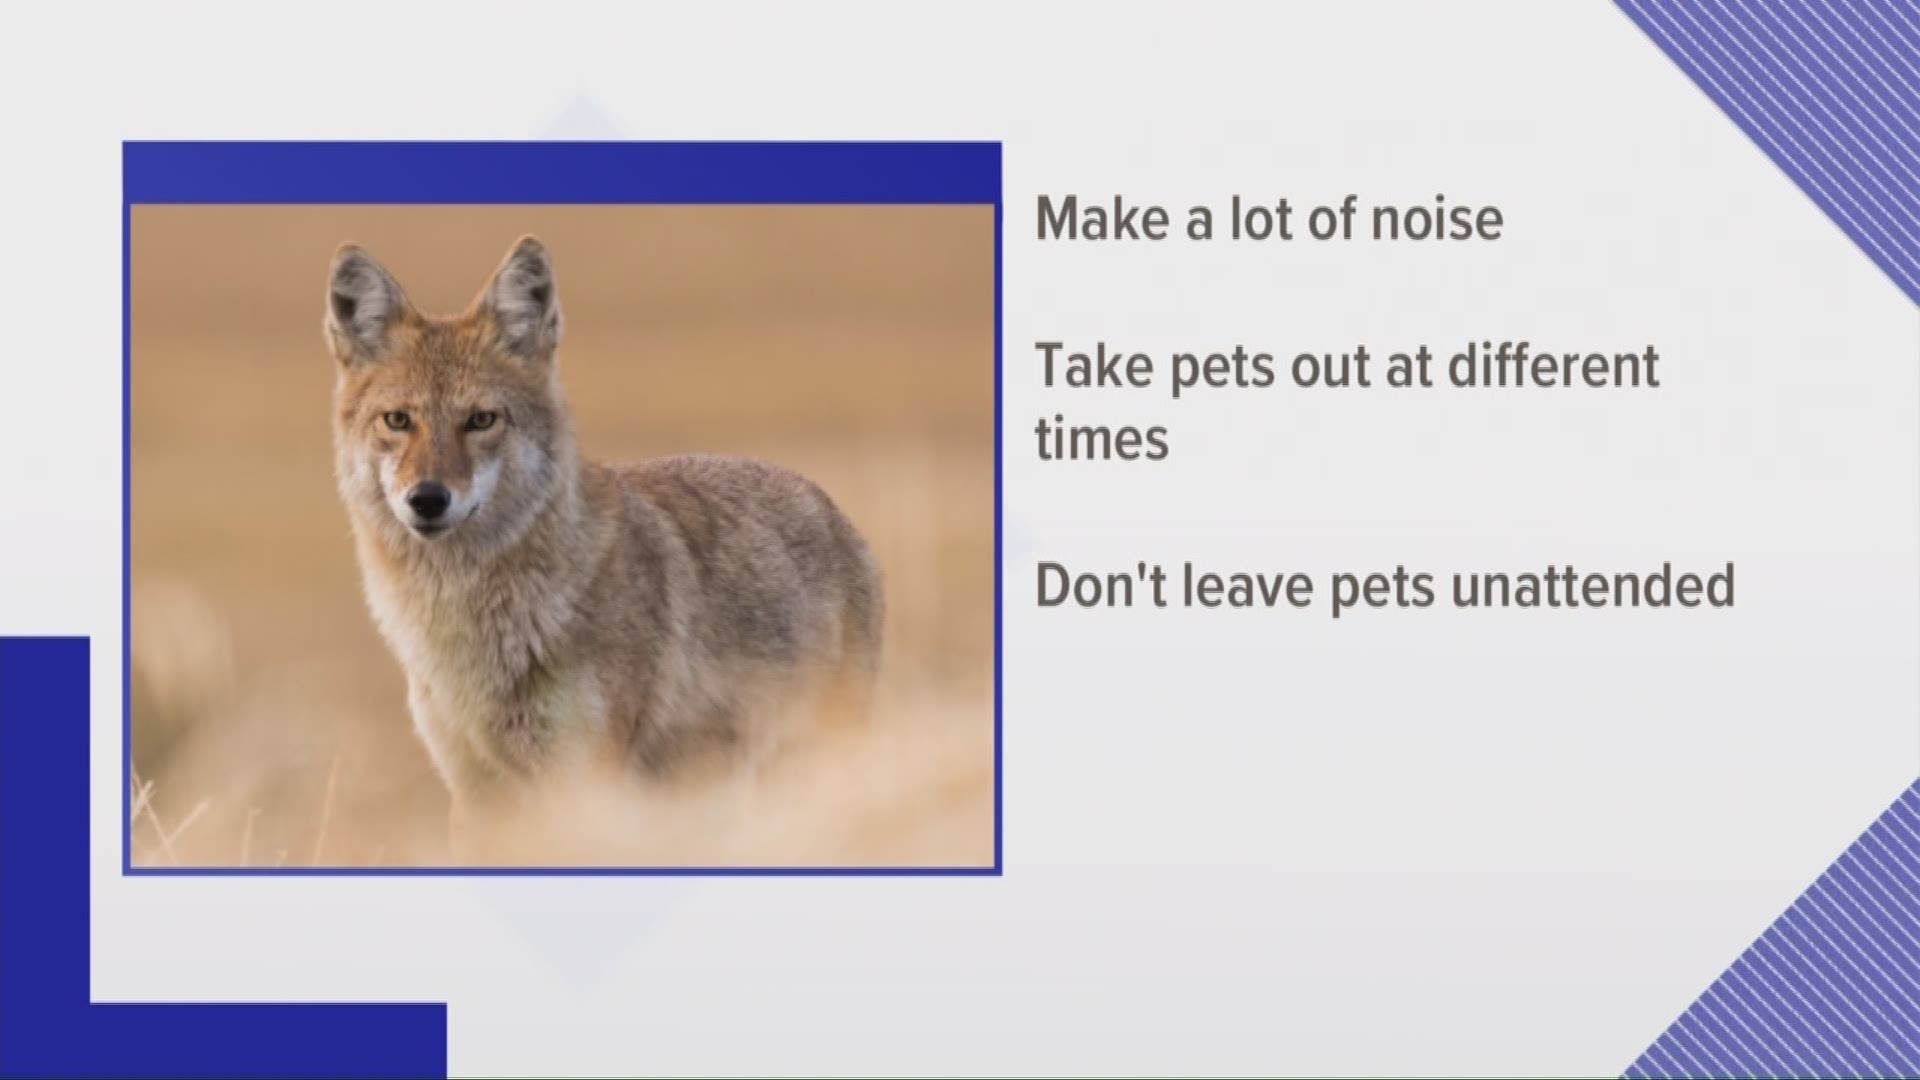 Coyote sightings on the rise